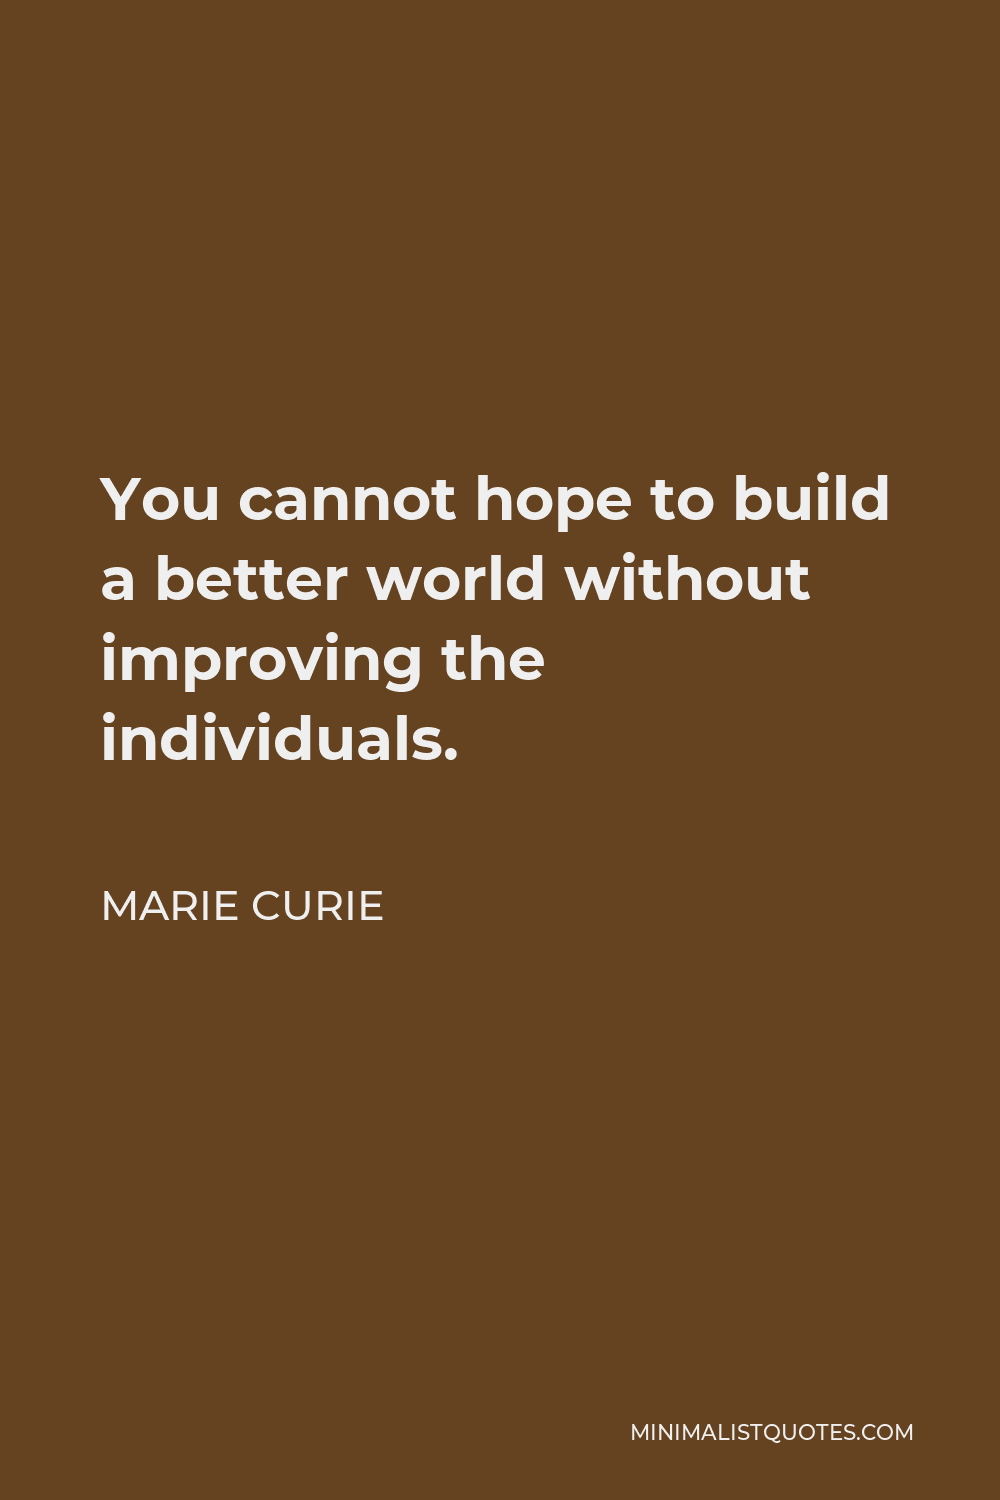 Marie Curie Quote - You cannot hope to build a better world without improving the individuals.